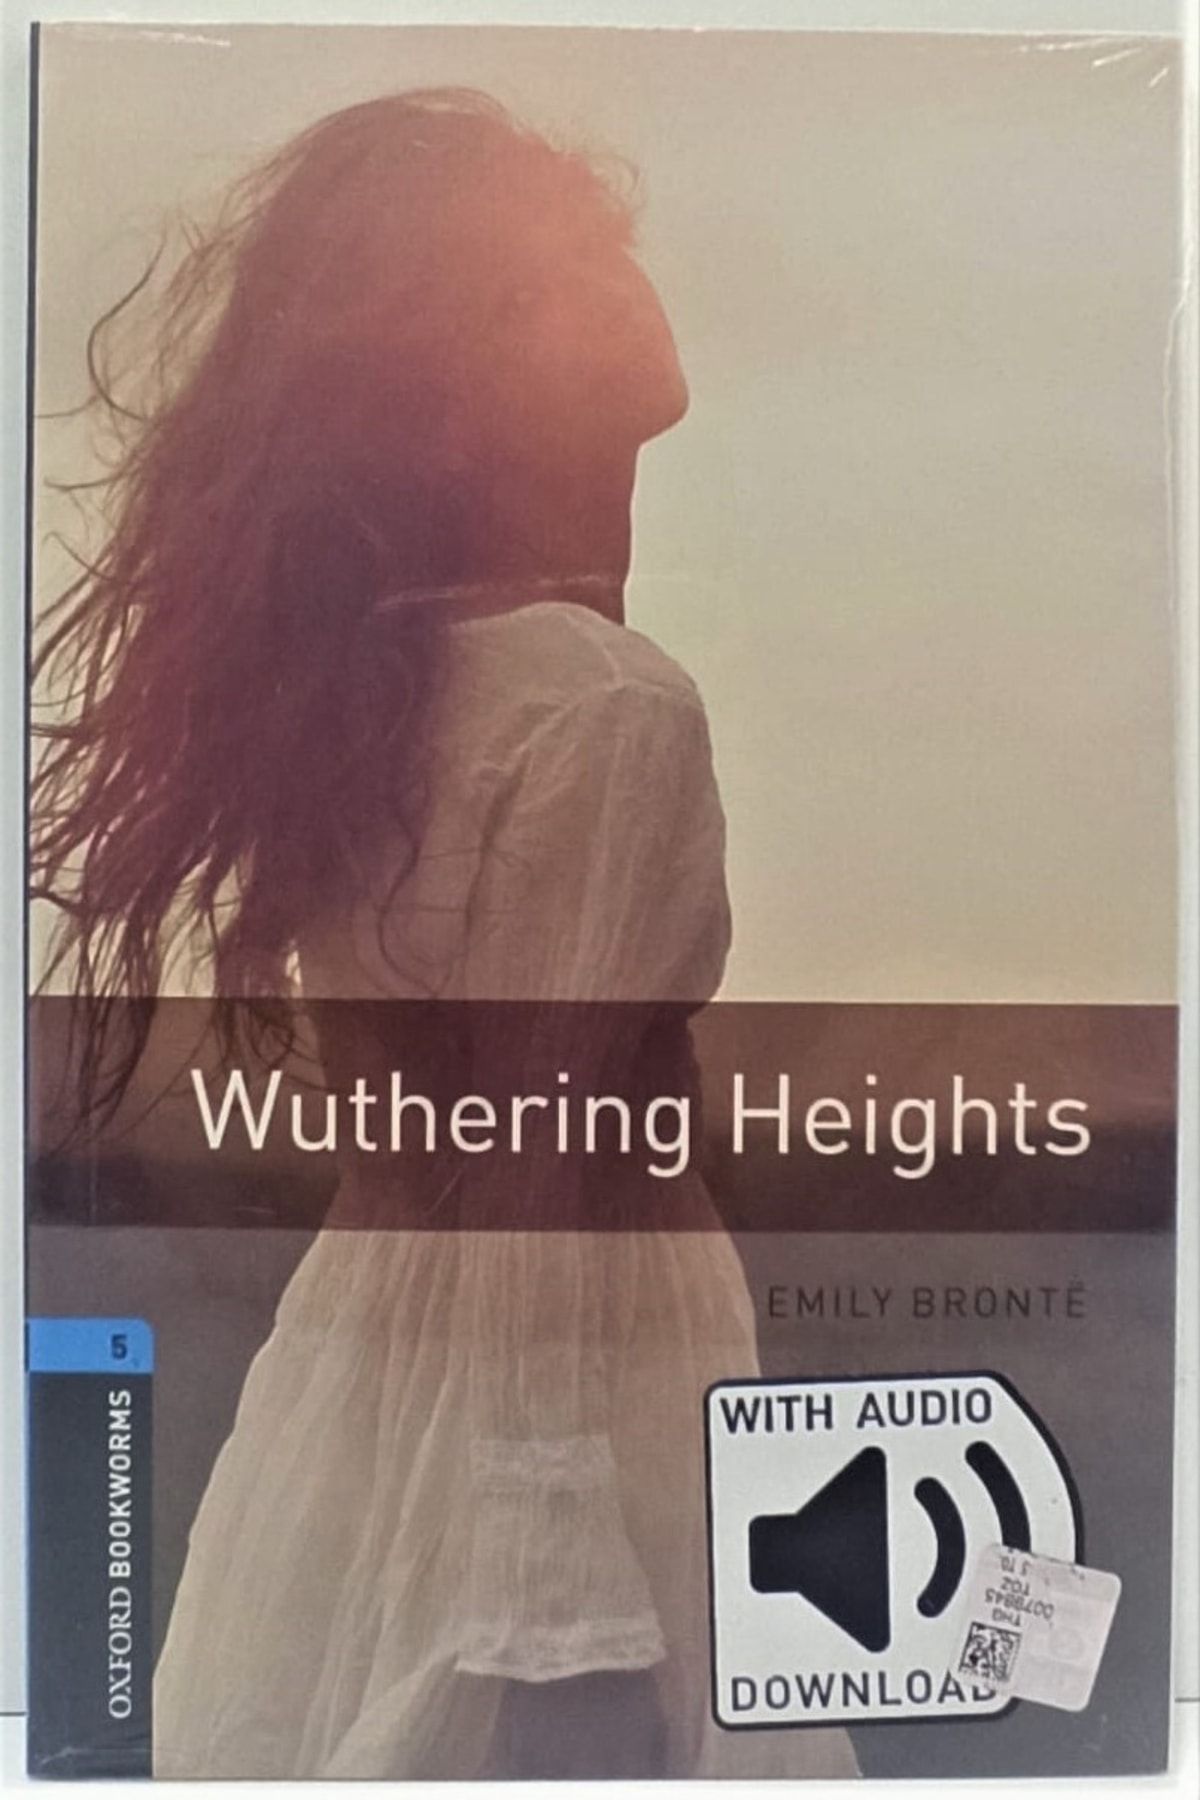 OXFORD UNIVERSITY PRESS Oxford Bookworms Stage 5 Wuthering Heights With Audio Dowload